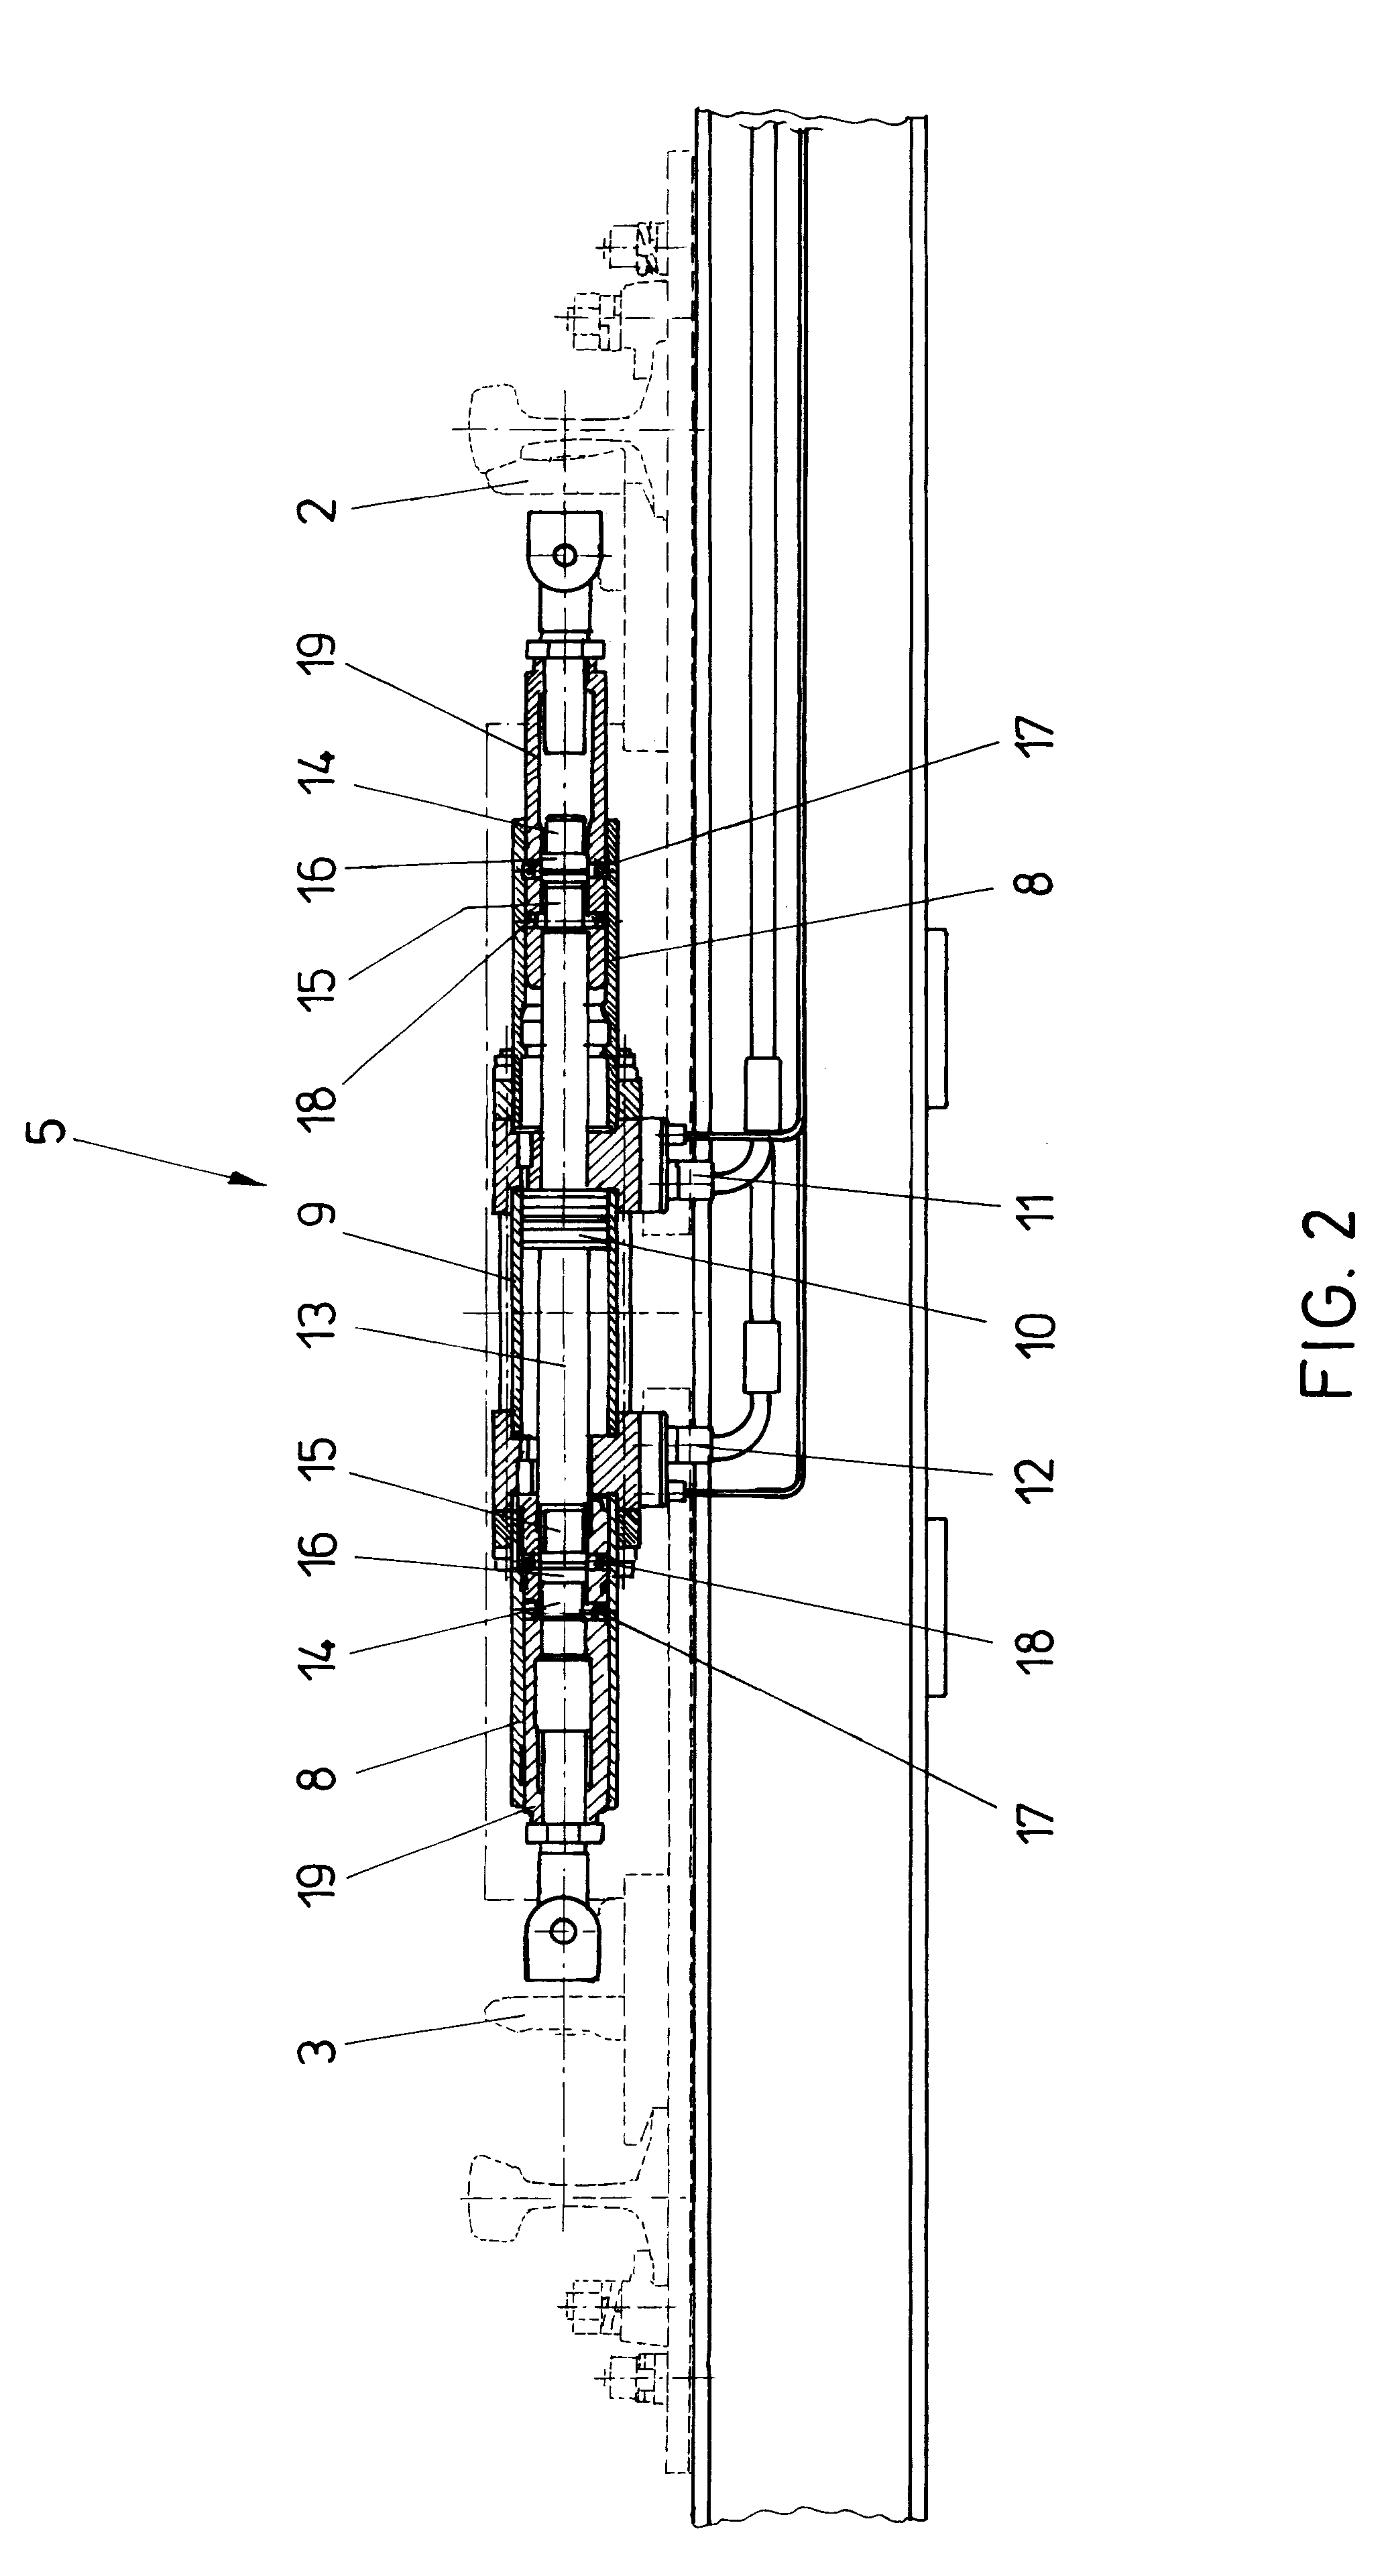 Device for locking end positions of mobile switch parts